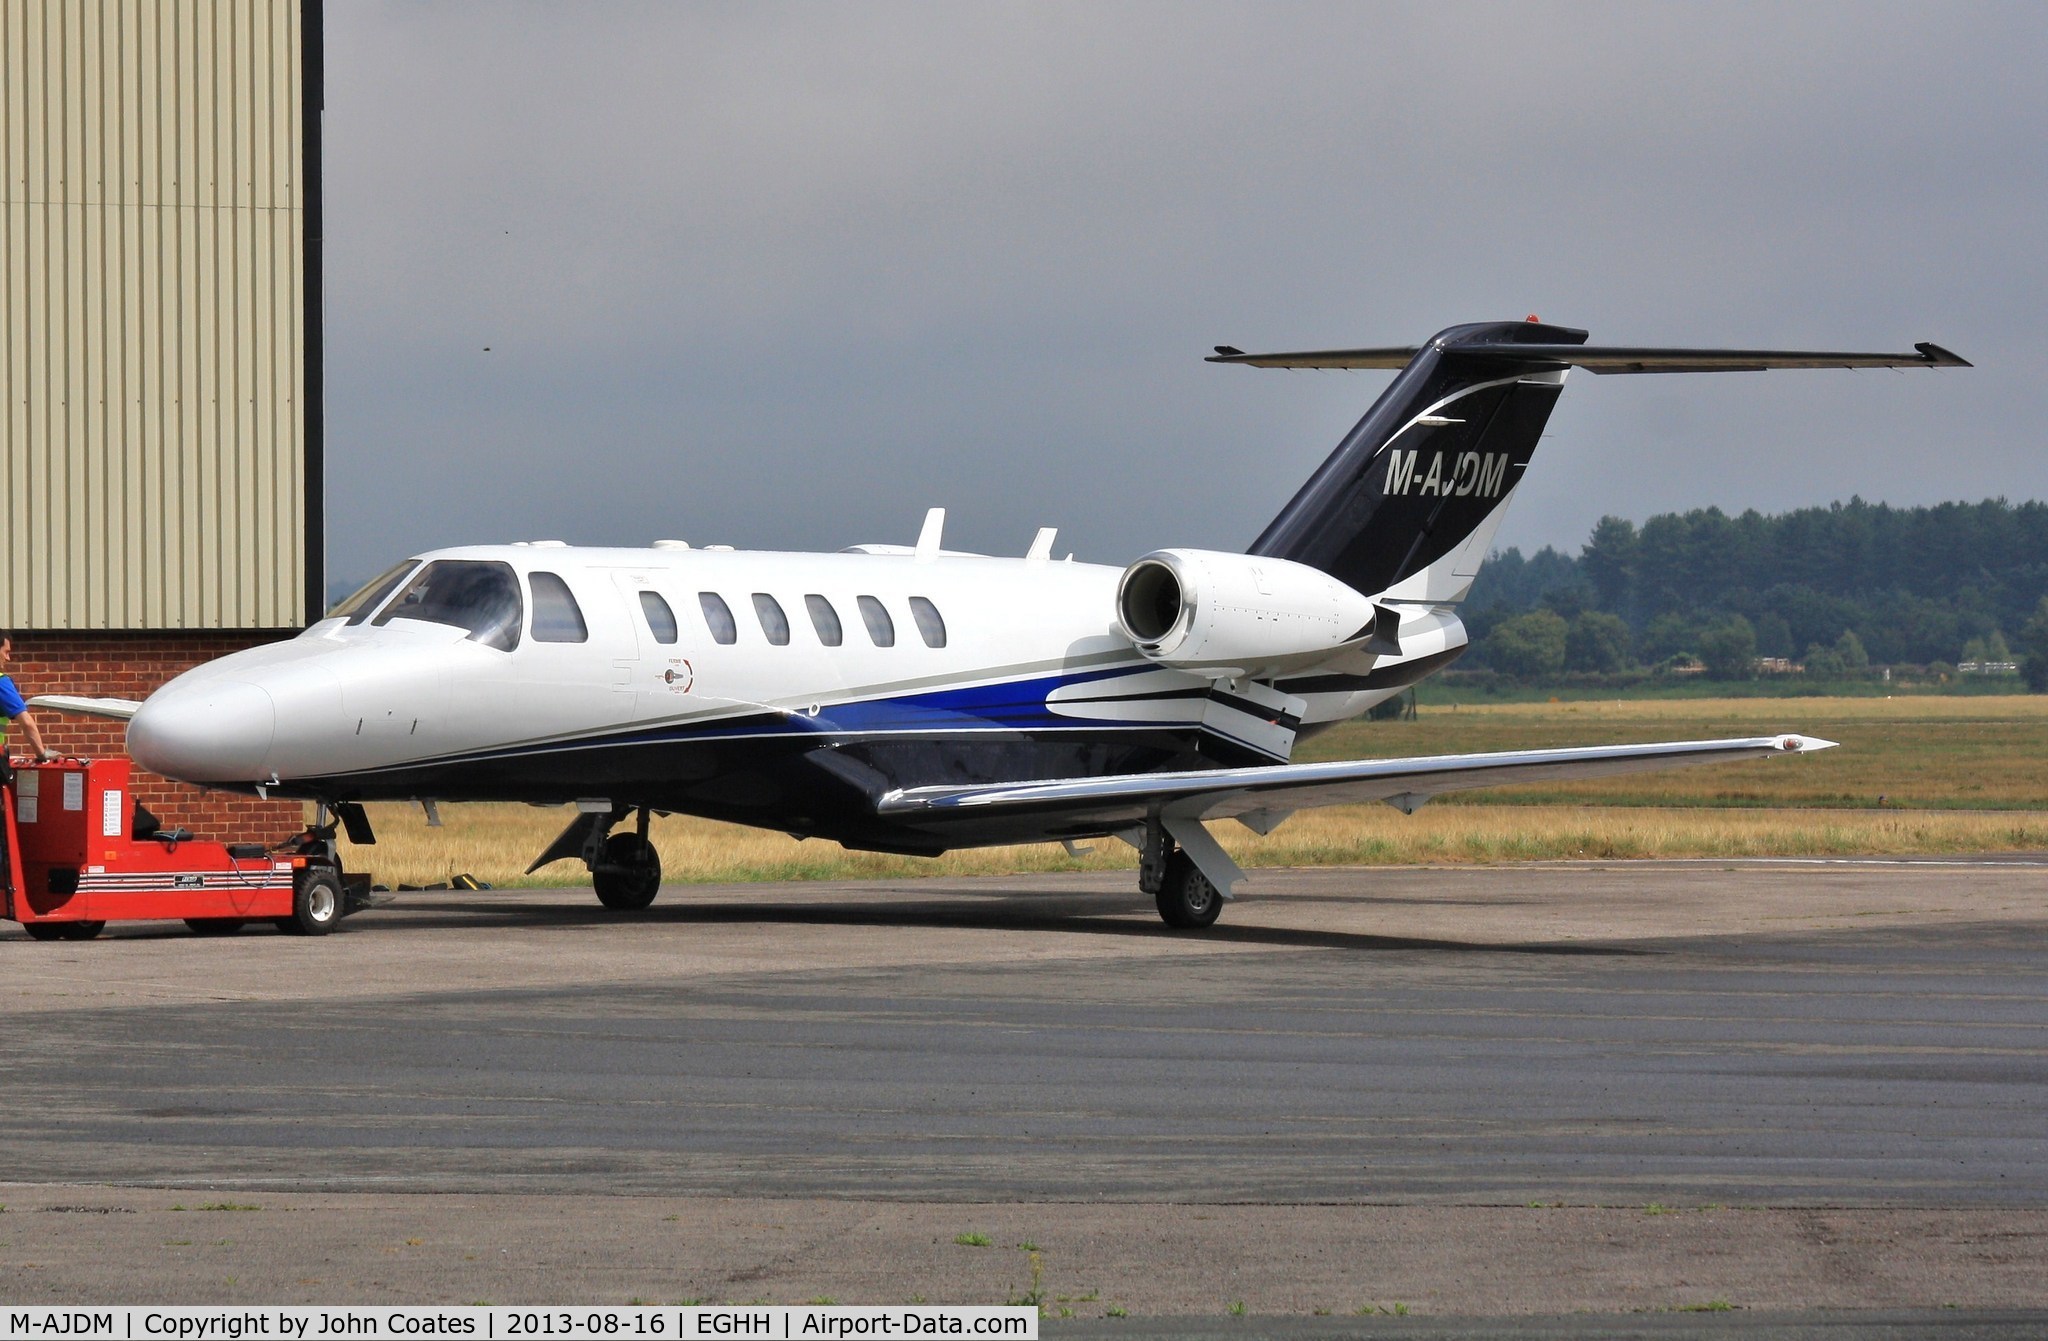 M-AJDM, 2000 Cessna 525A CitationJet CJ2 C/N 525A-0009, At CSE about to become N457MD